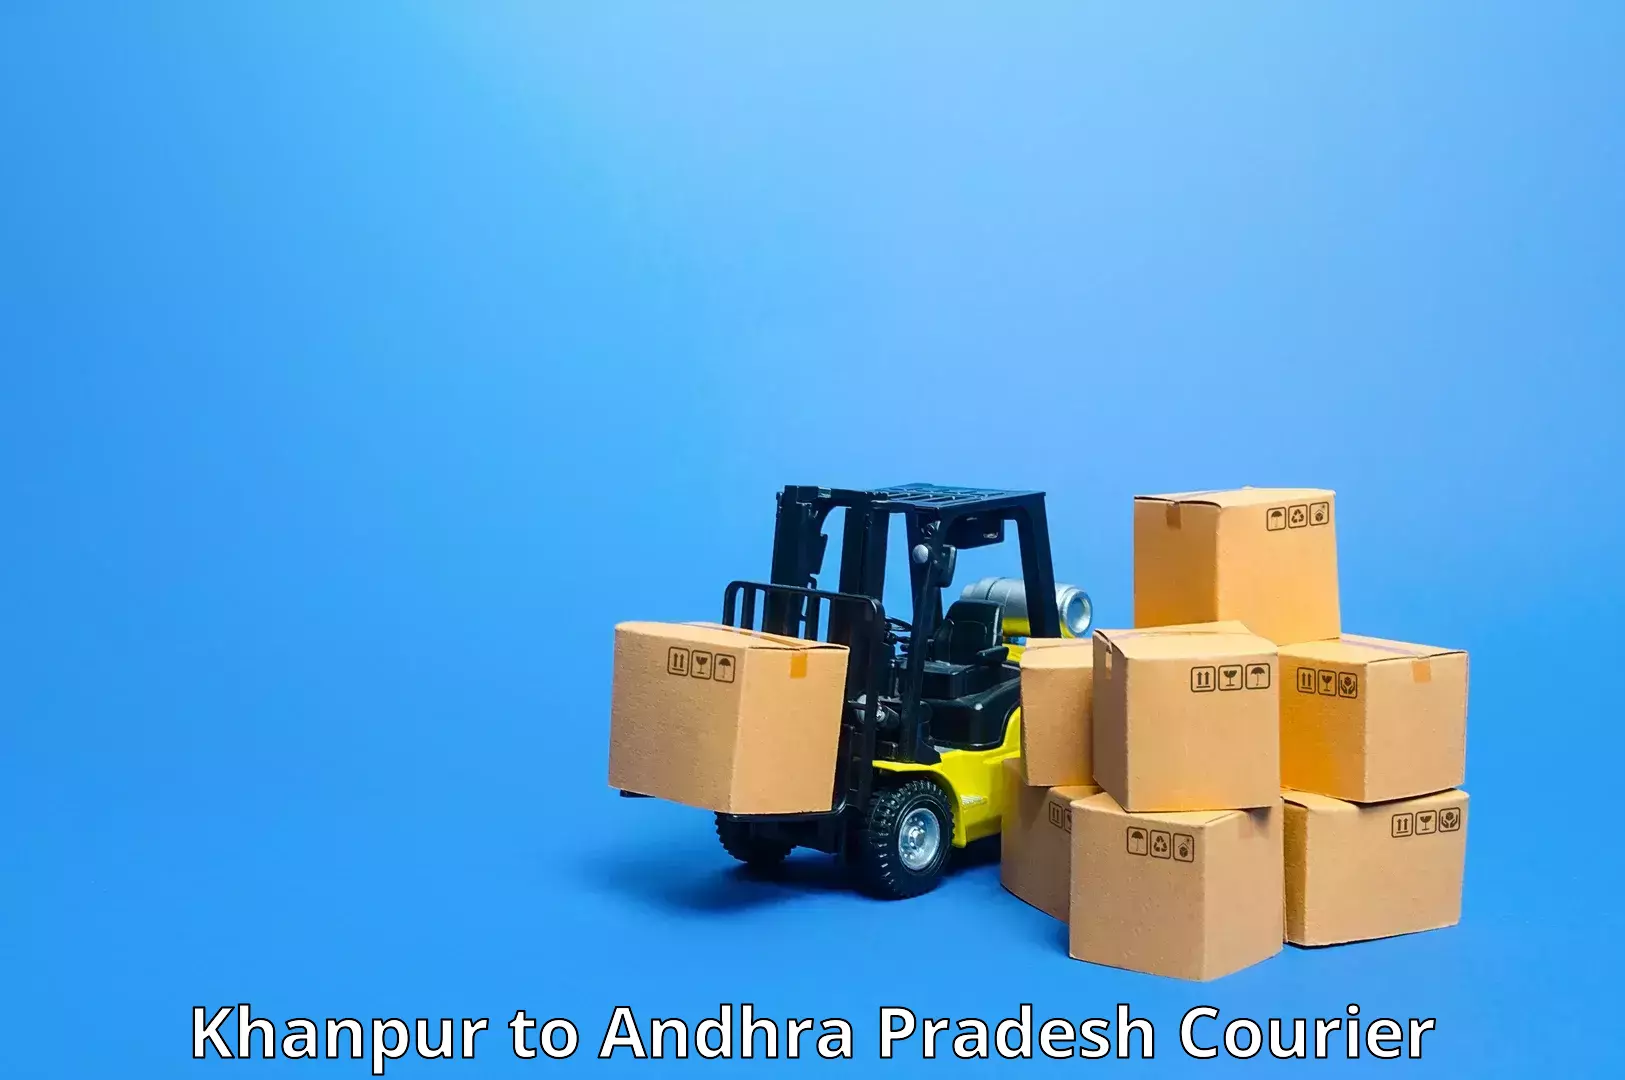 High-capacity parcel service in Khanpur to Nellore